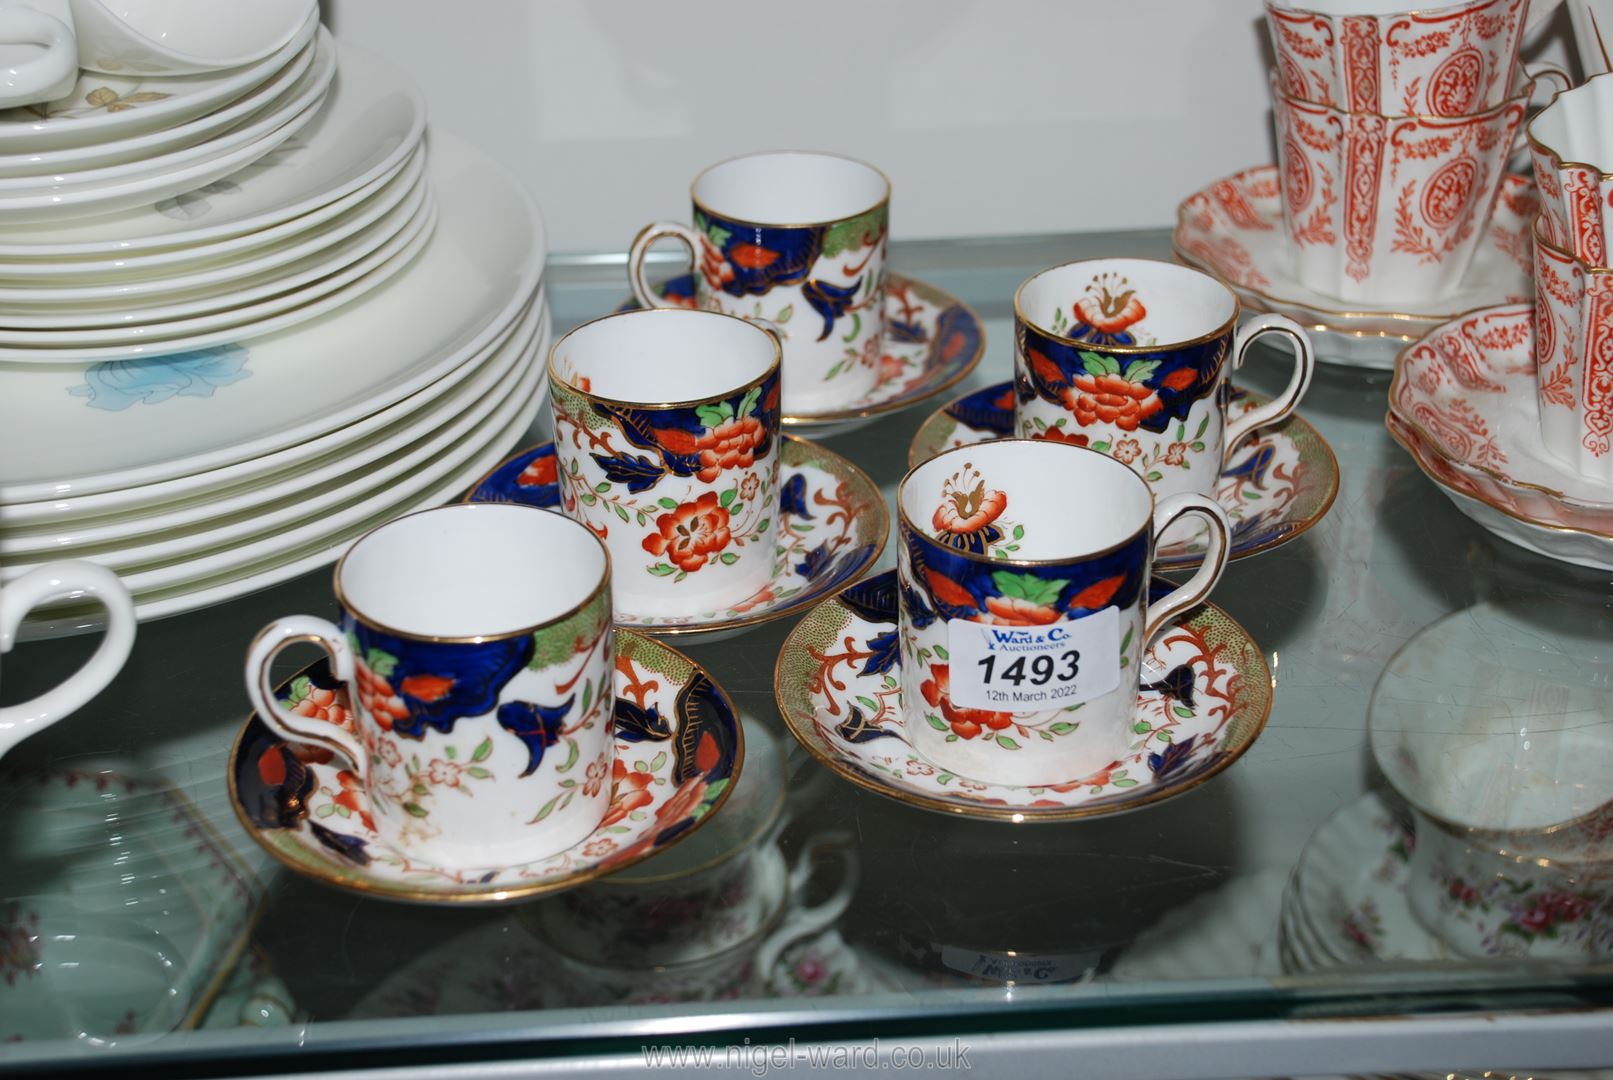 Five Gaudy Welsh style cups and saucers with orange flower and green leaves on blue and white